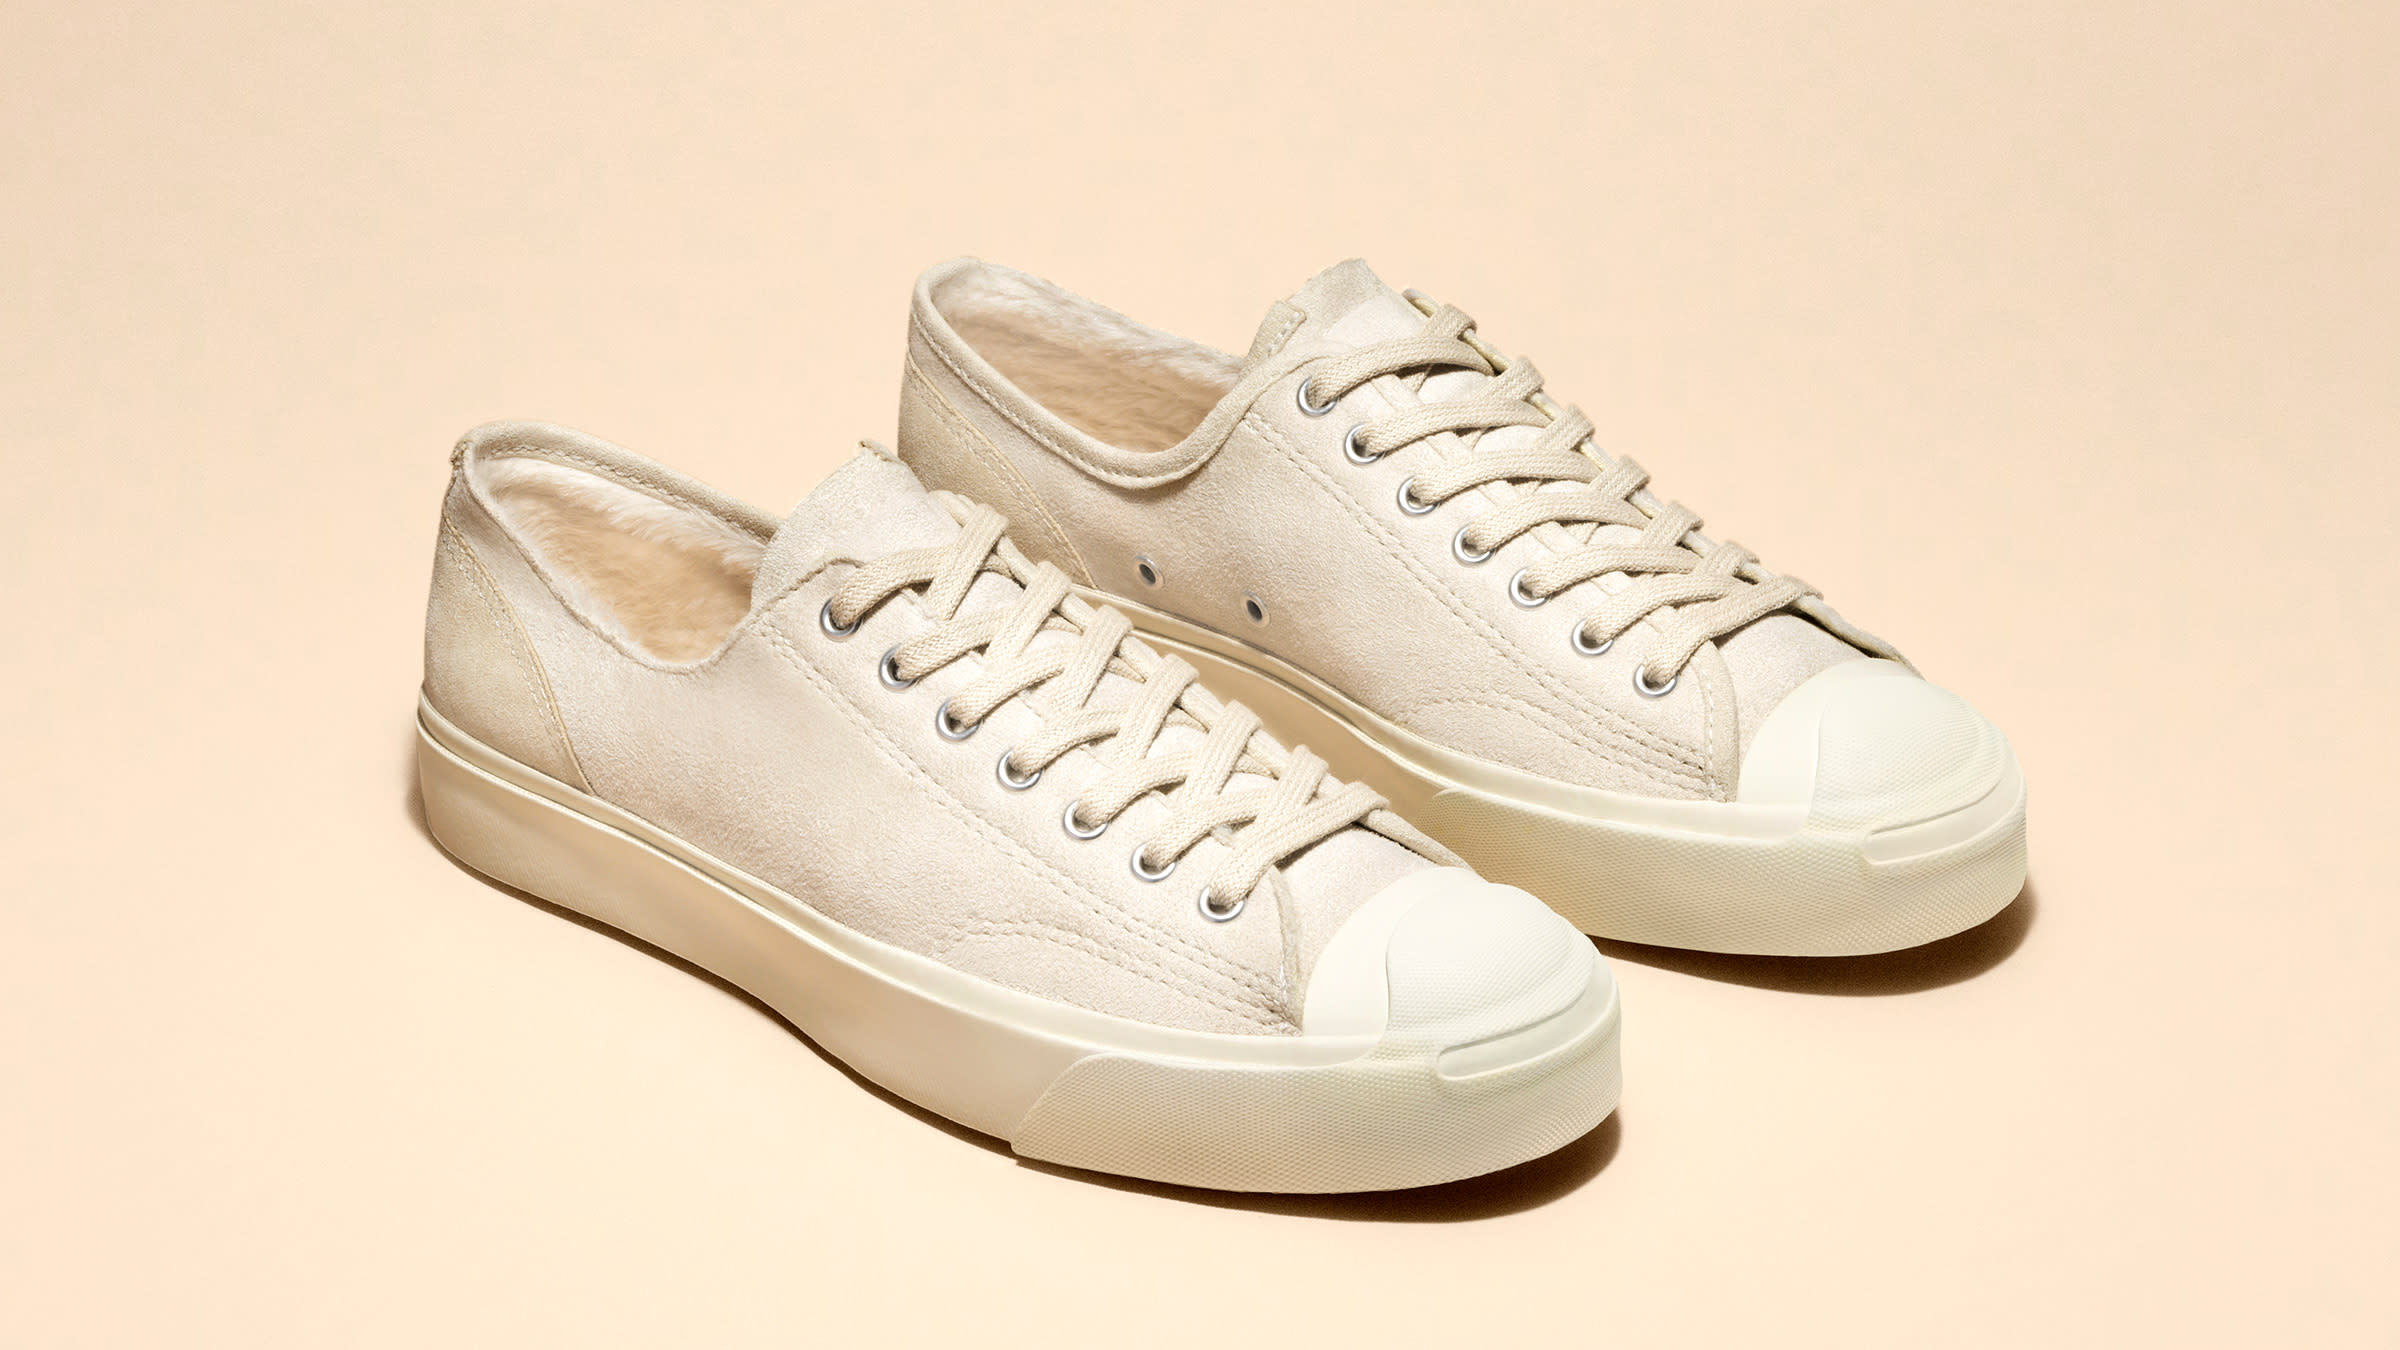 Converse x Clot Jack Purcell Ox (White Swan, Egret & White) | END. Launches